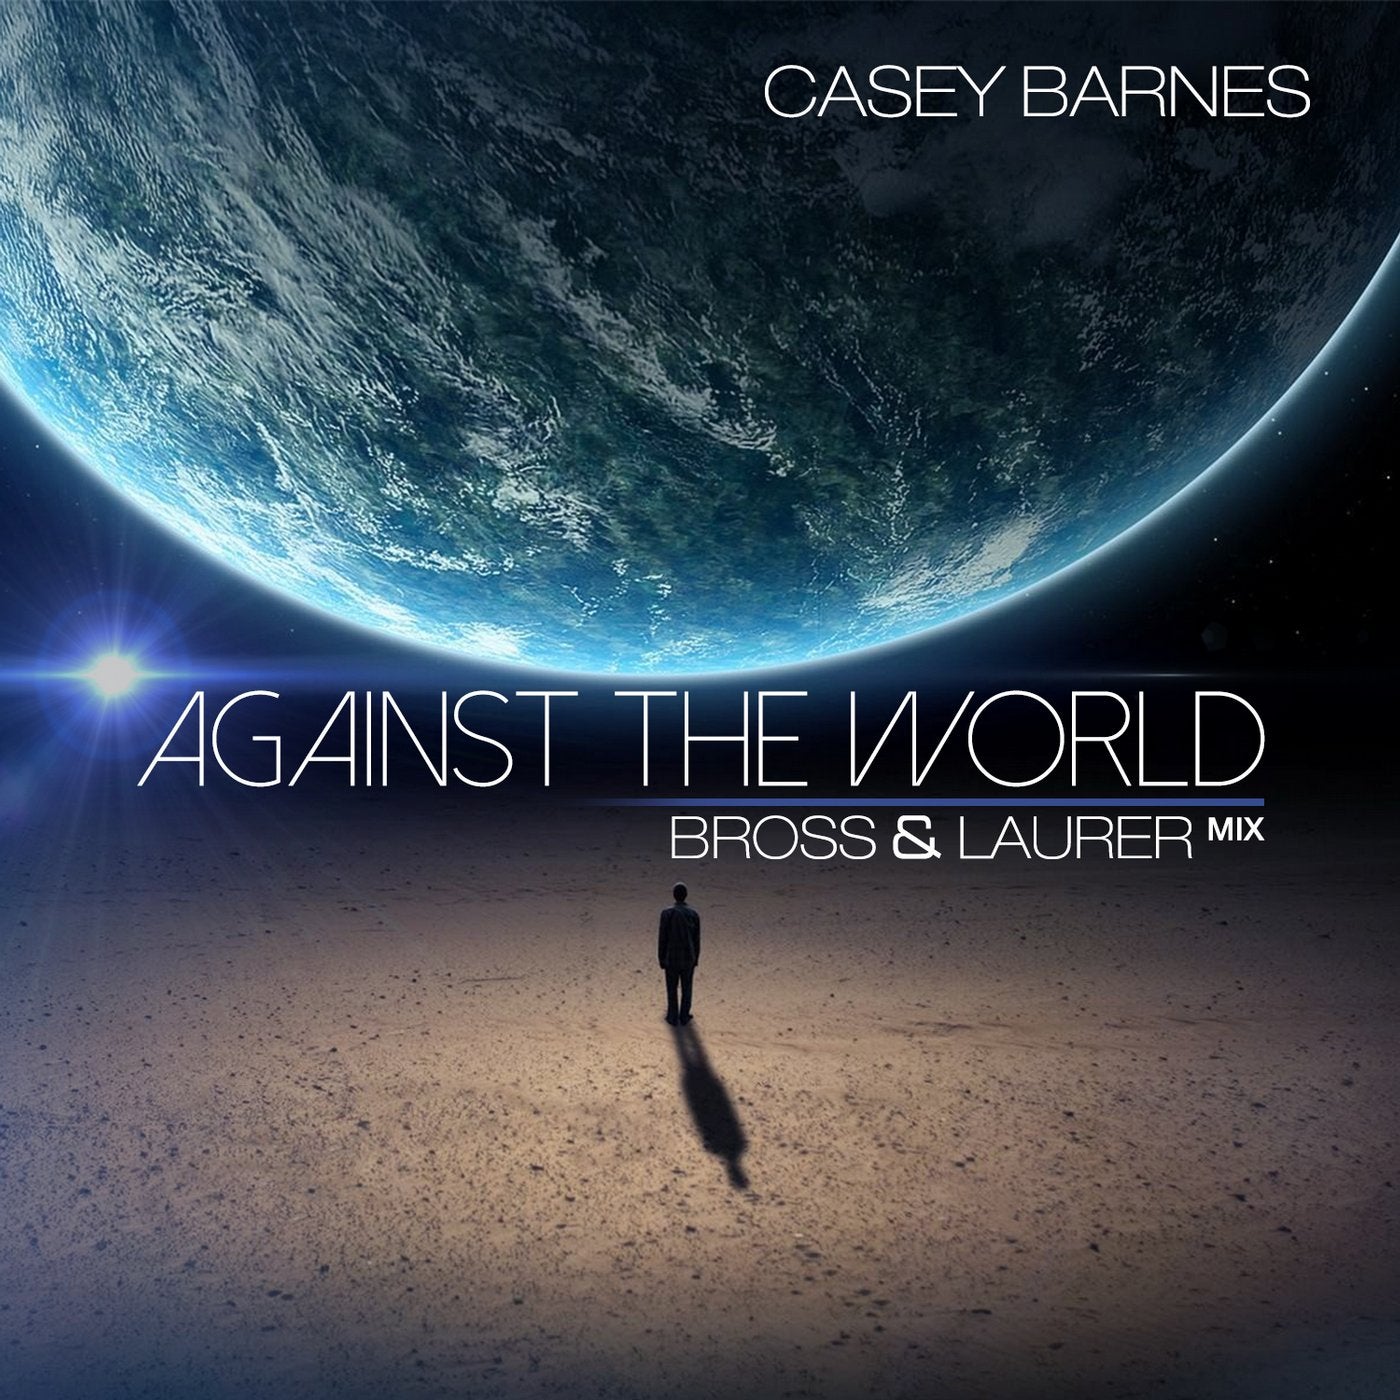 Against the world